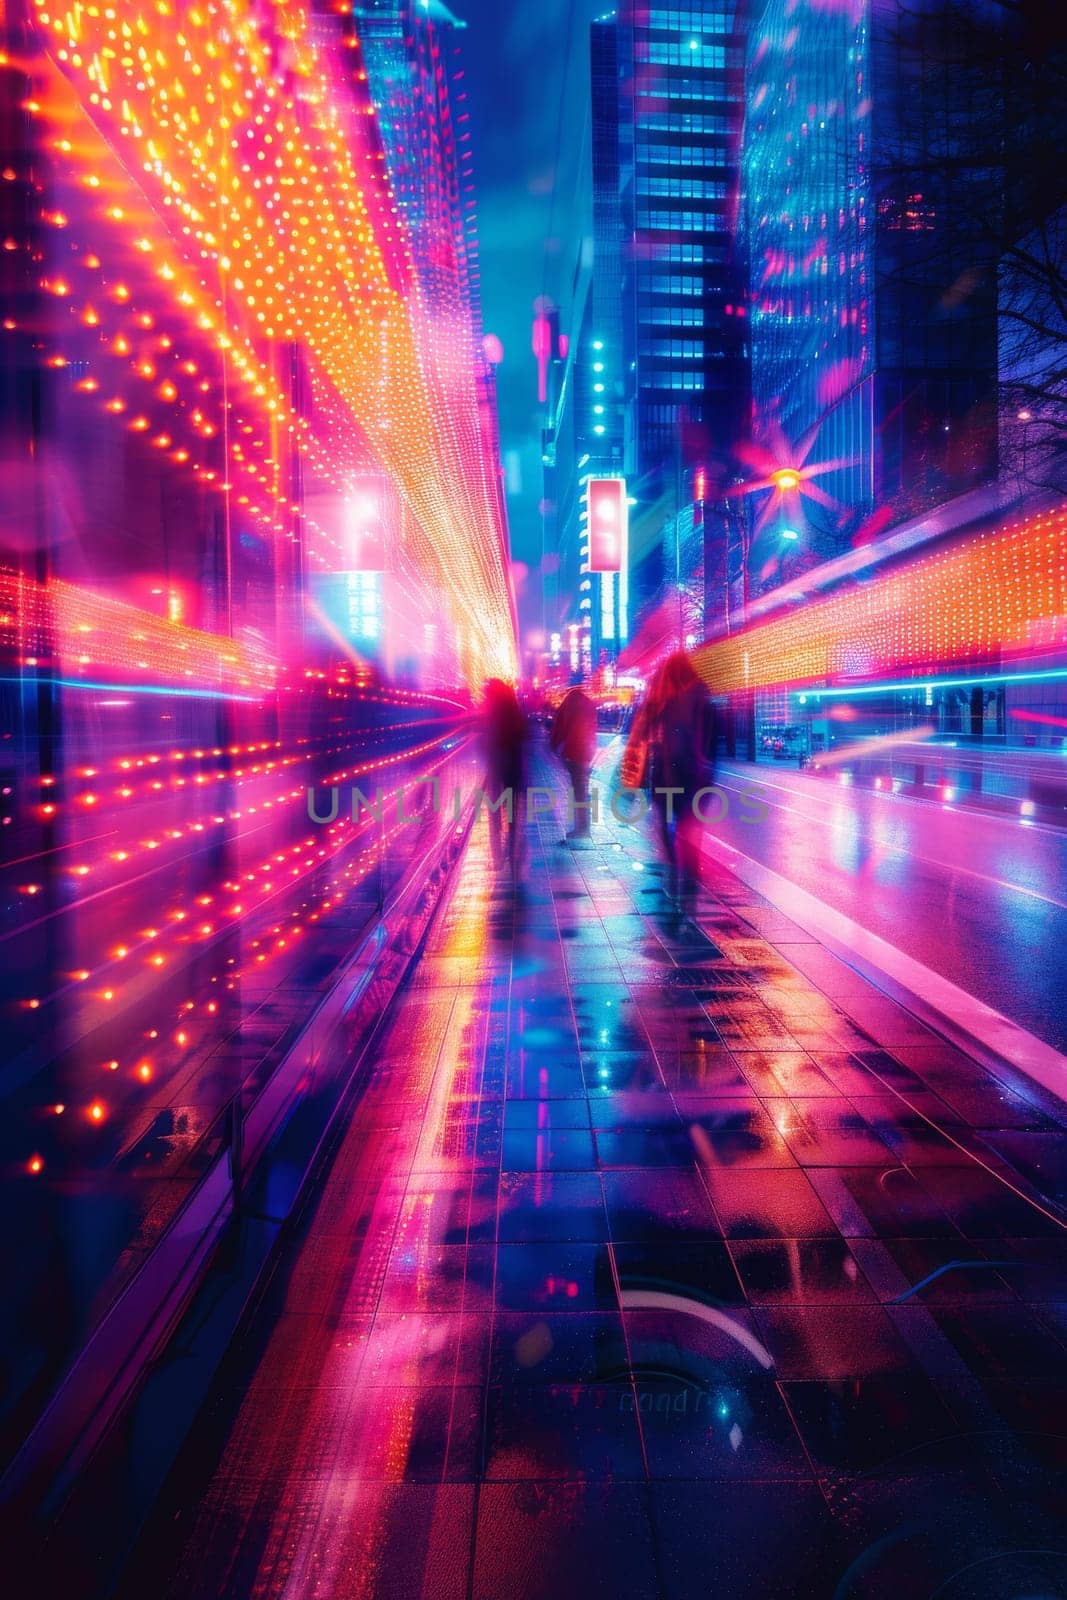 A city street with neon lights and cars. The lights are bright and colorful, creating a vibrant and energetic atmosphere. The cars are moving quickly, adding to the sense of motion and excitement